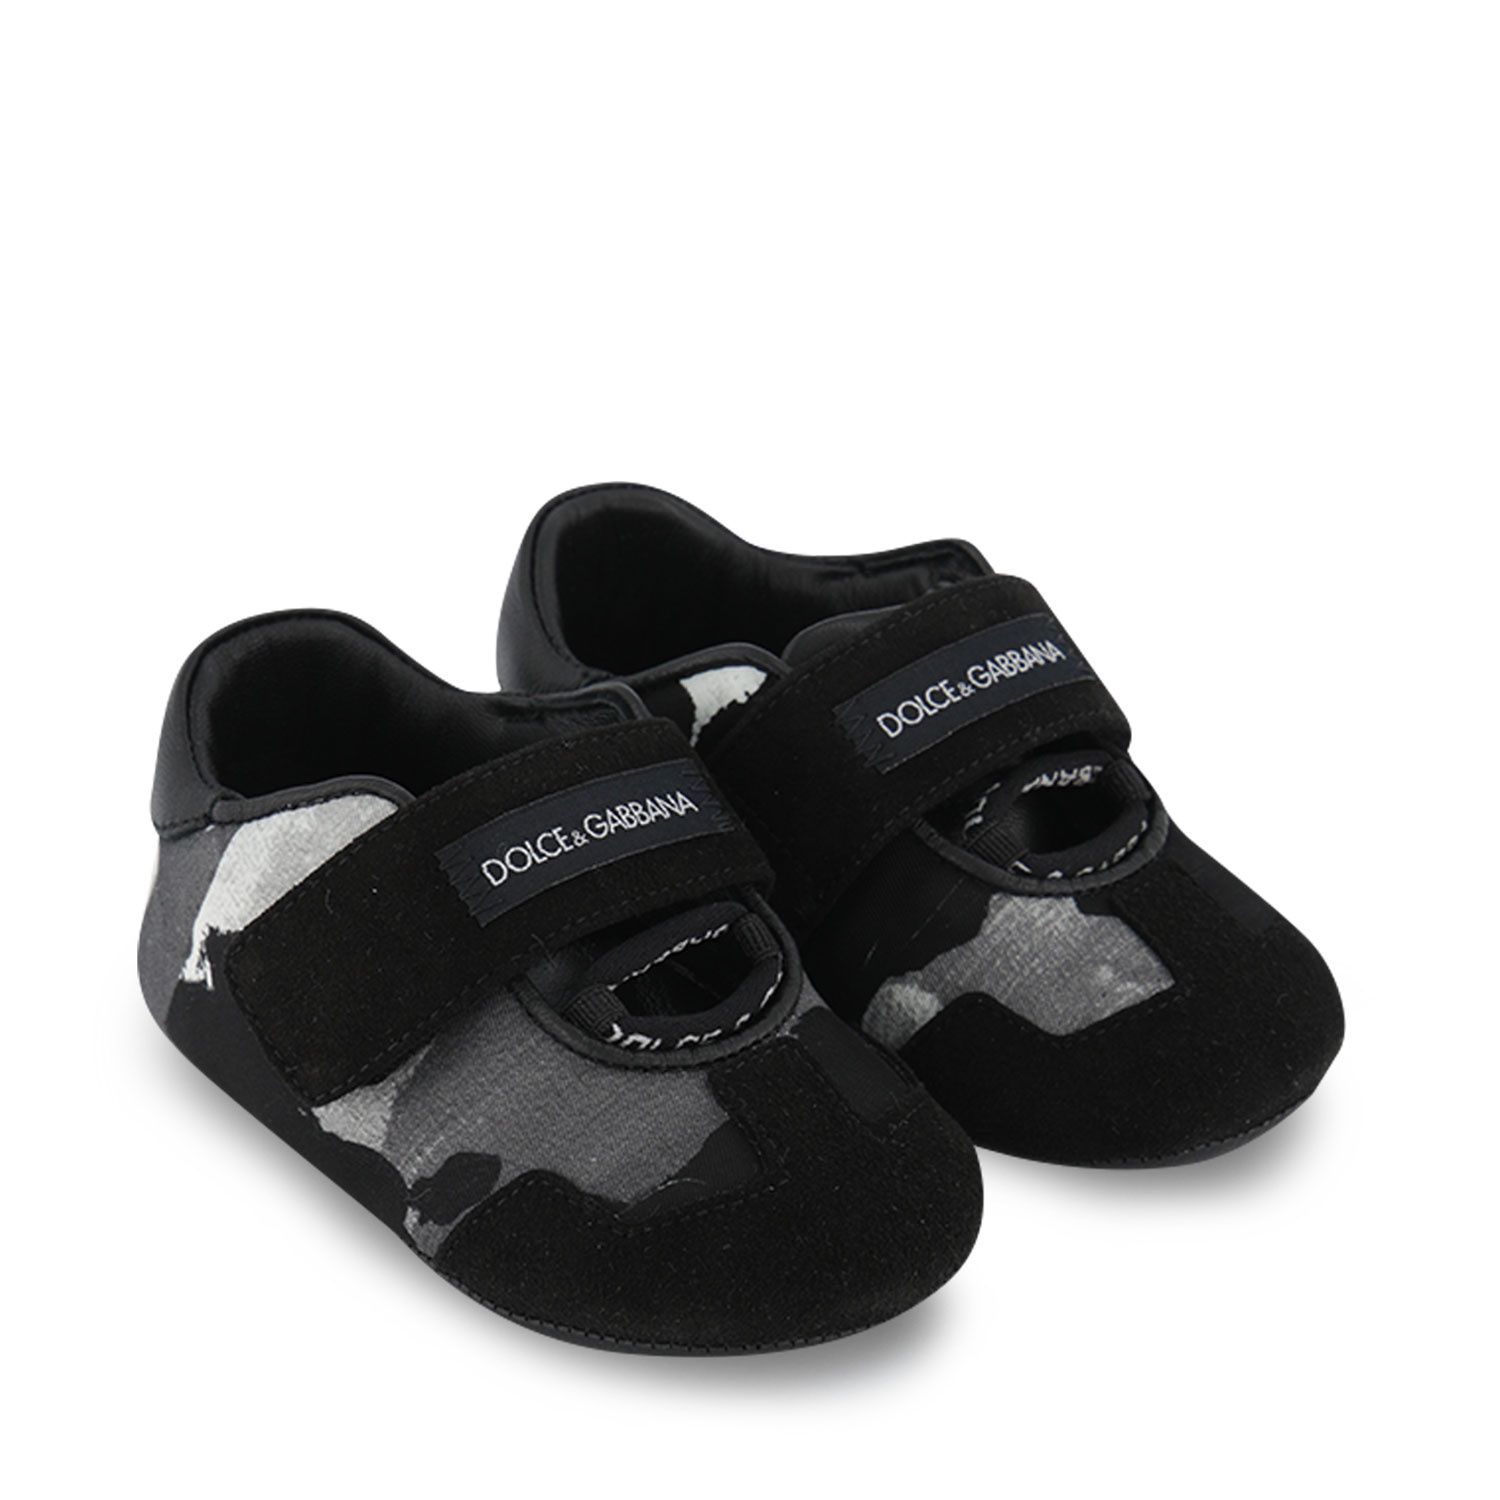 dolce and gabbana baby shoes